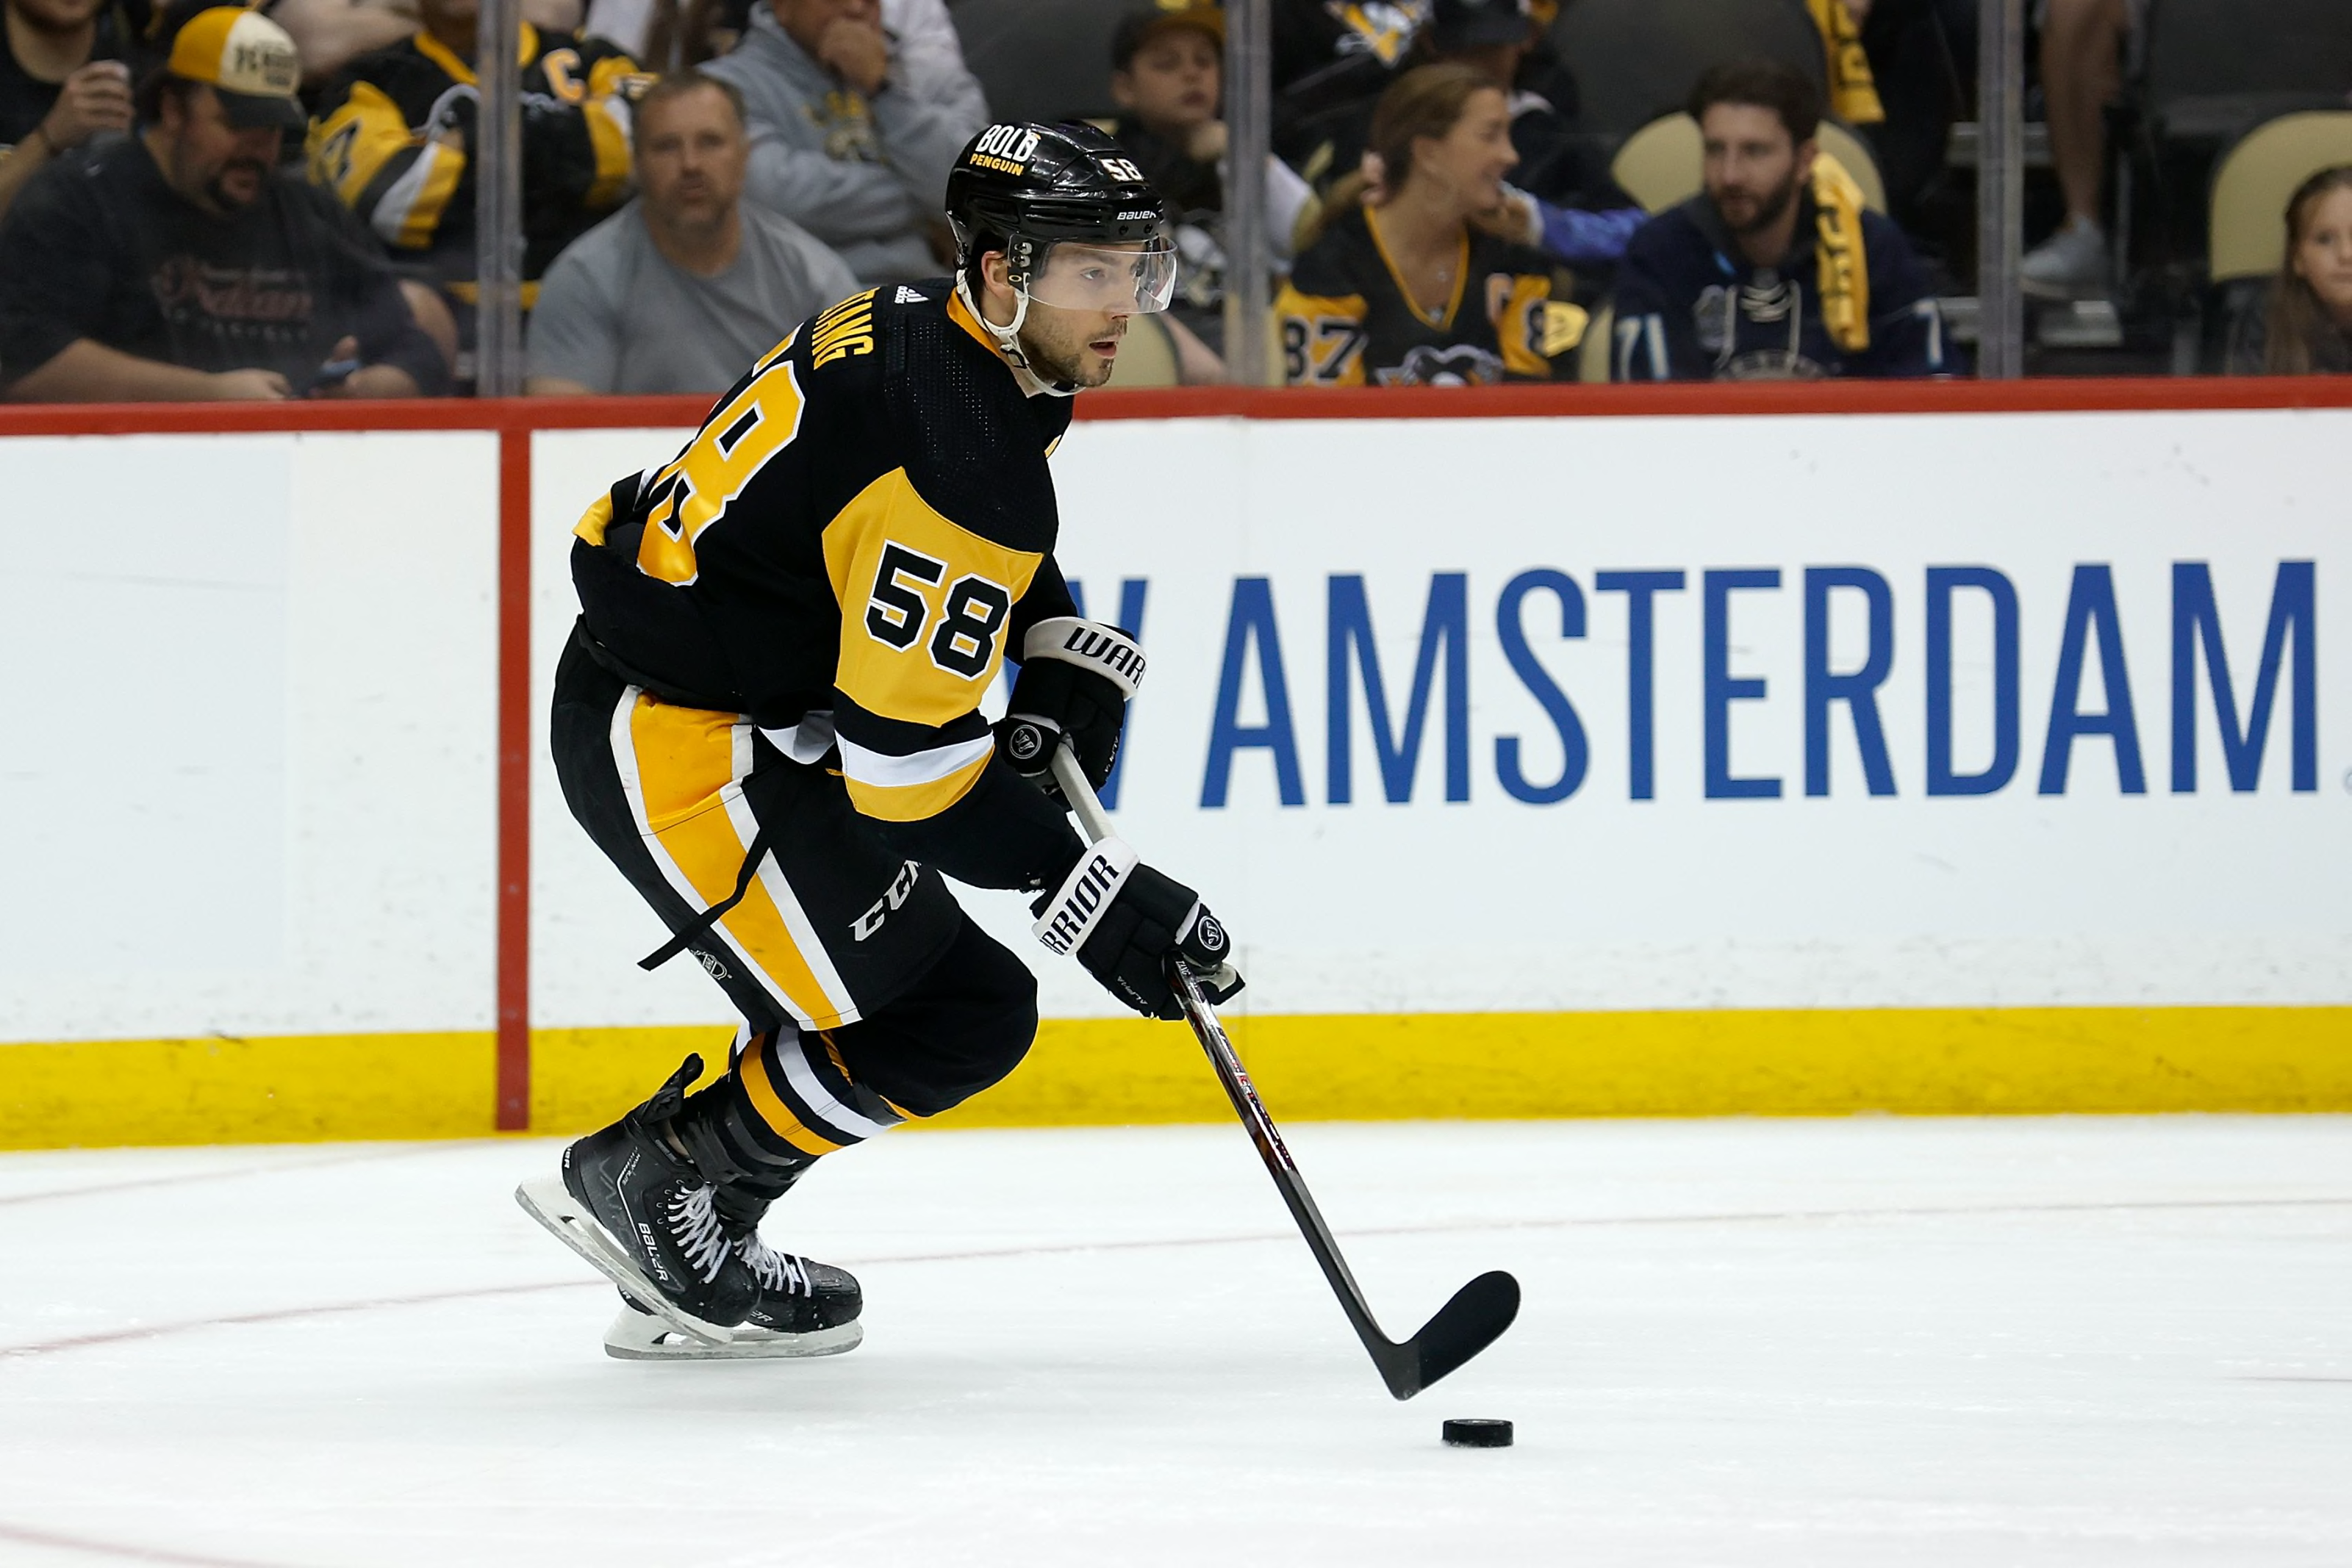 Player photos for the 2020-21 Pittsburgh Penguins at